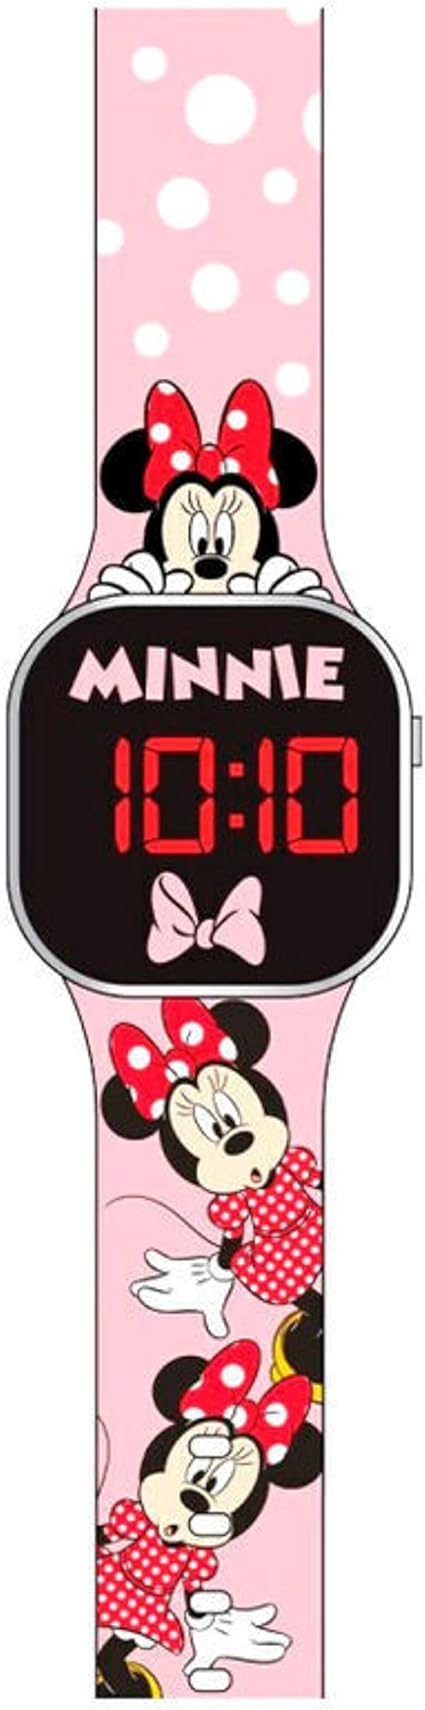 SRV Hub Minnie Mouse LED Watch | 12 Hour Clock Format | Battery Operated